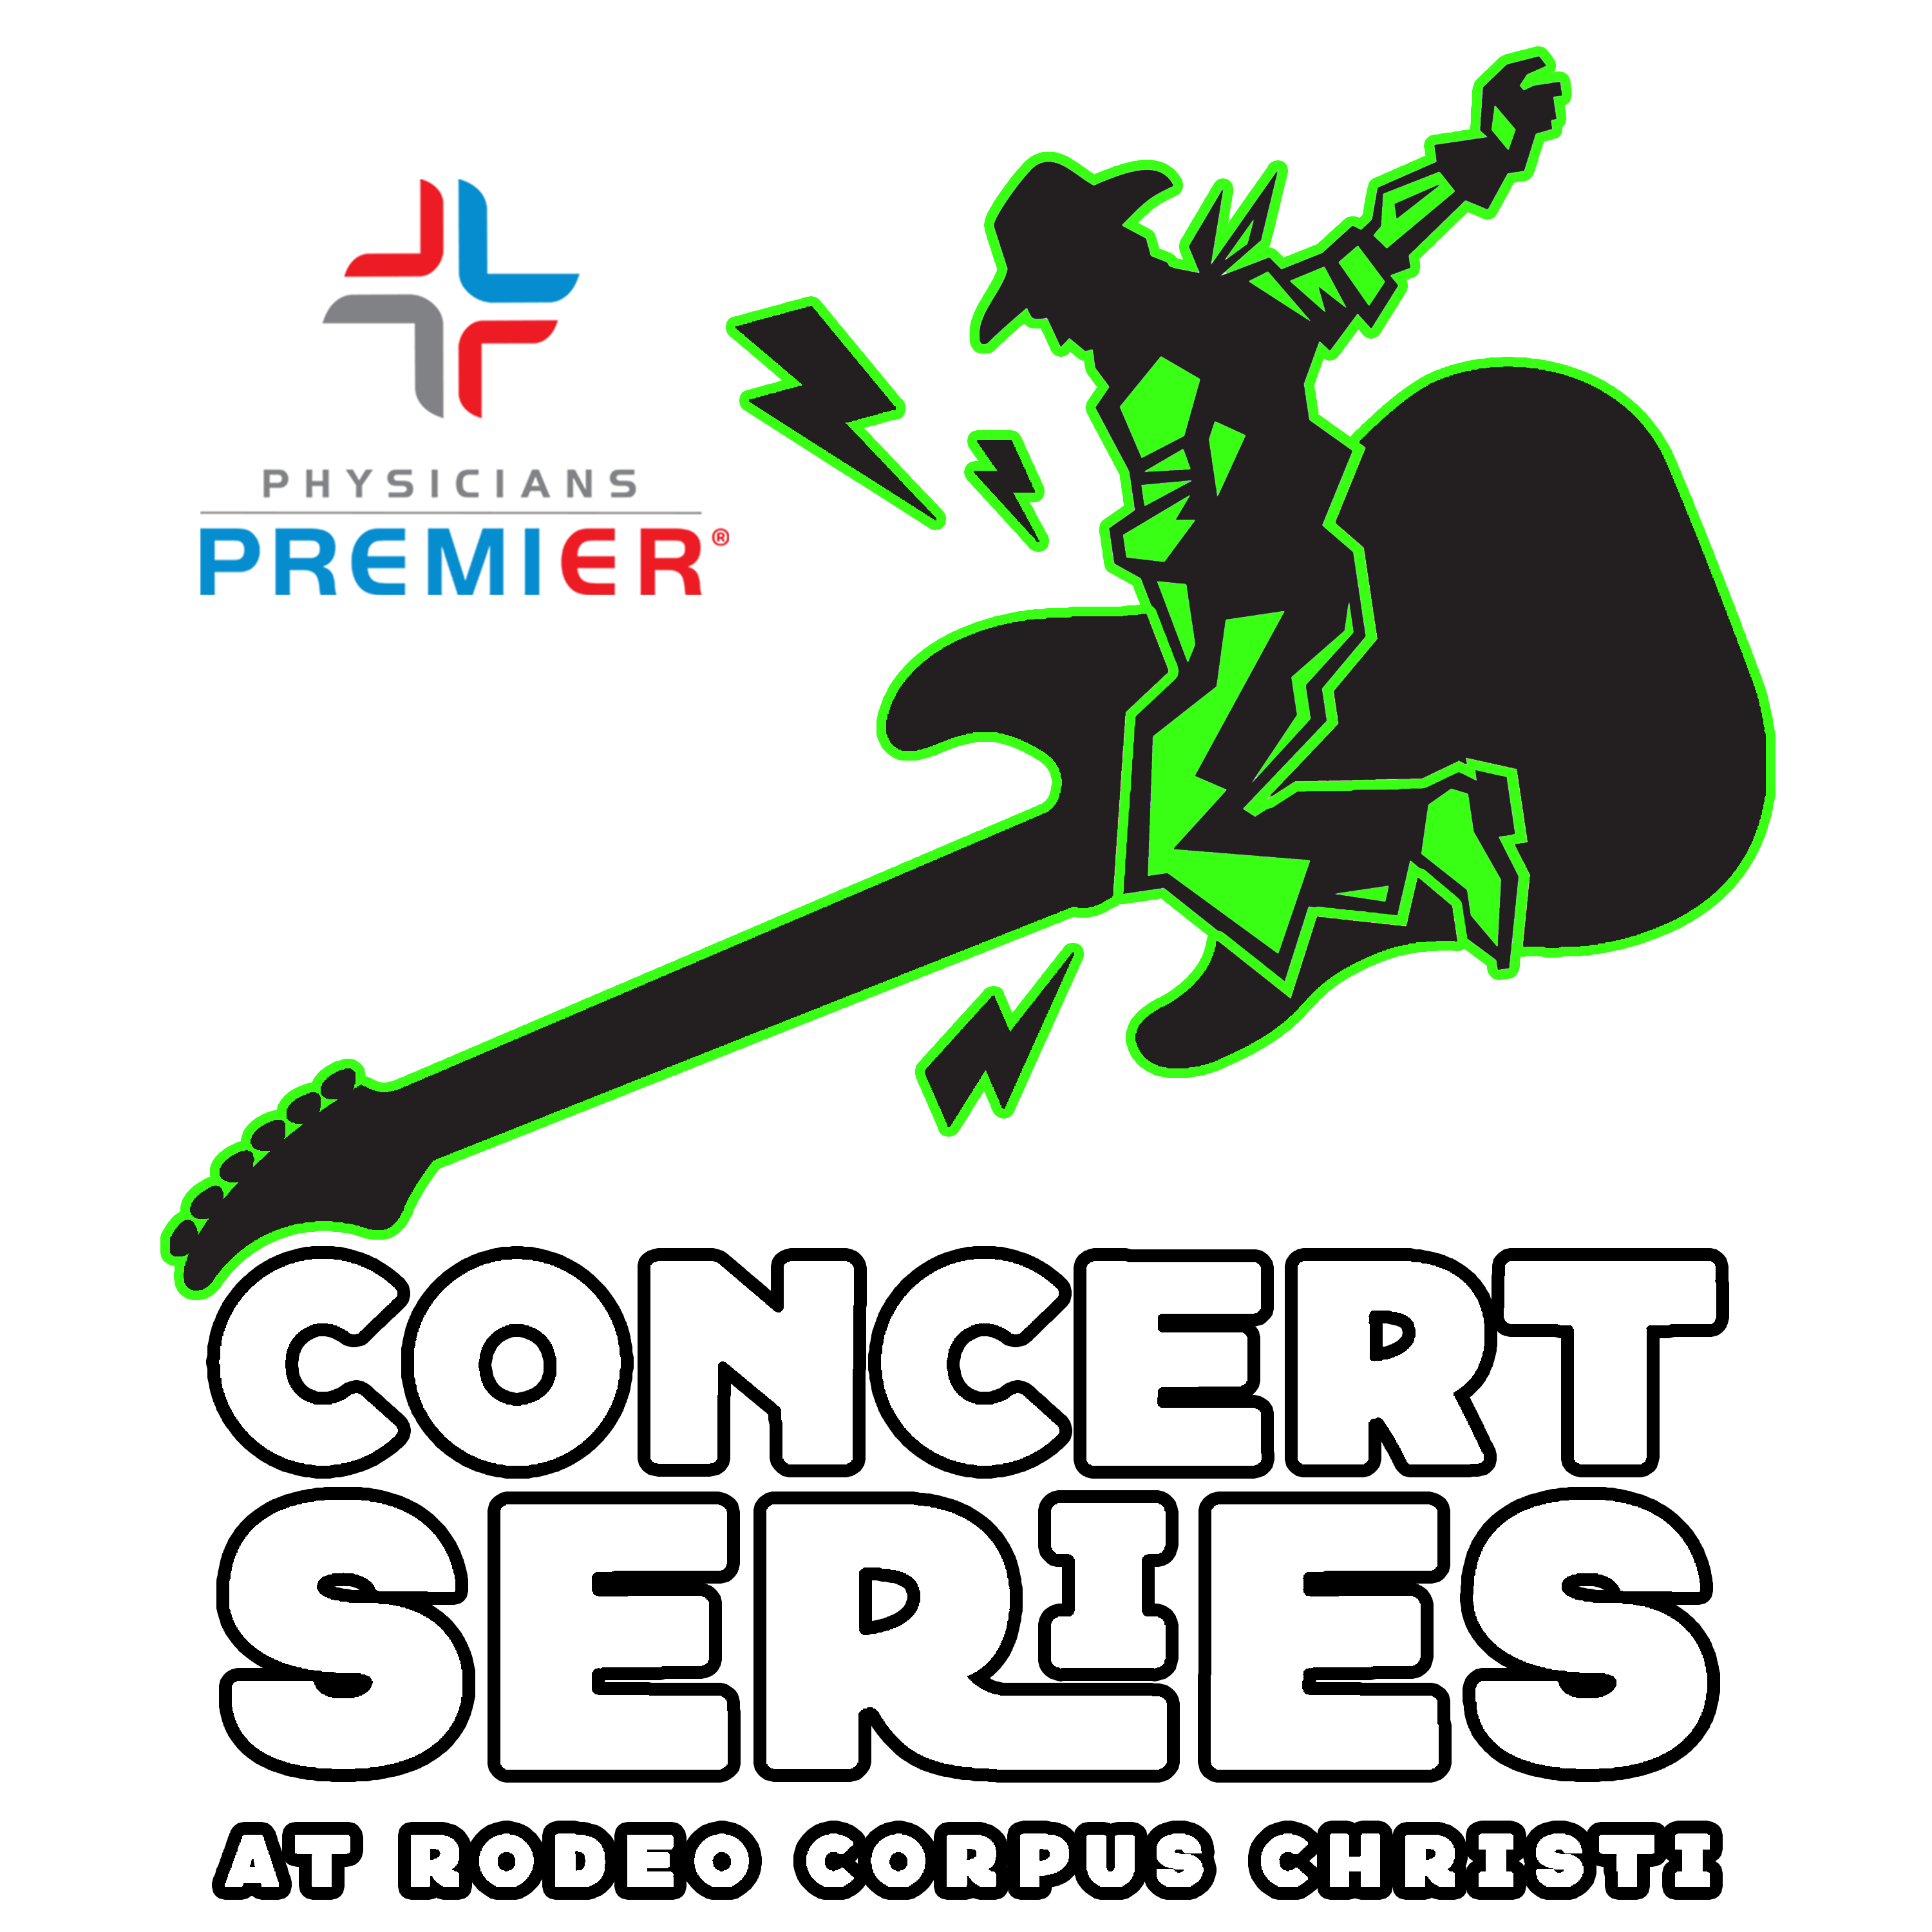 Showing the Rodeo Concert Series logo.